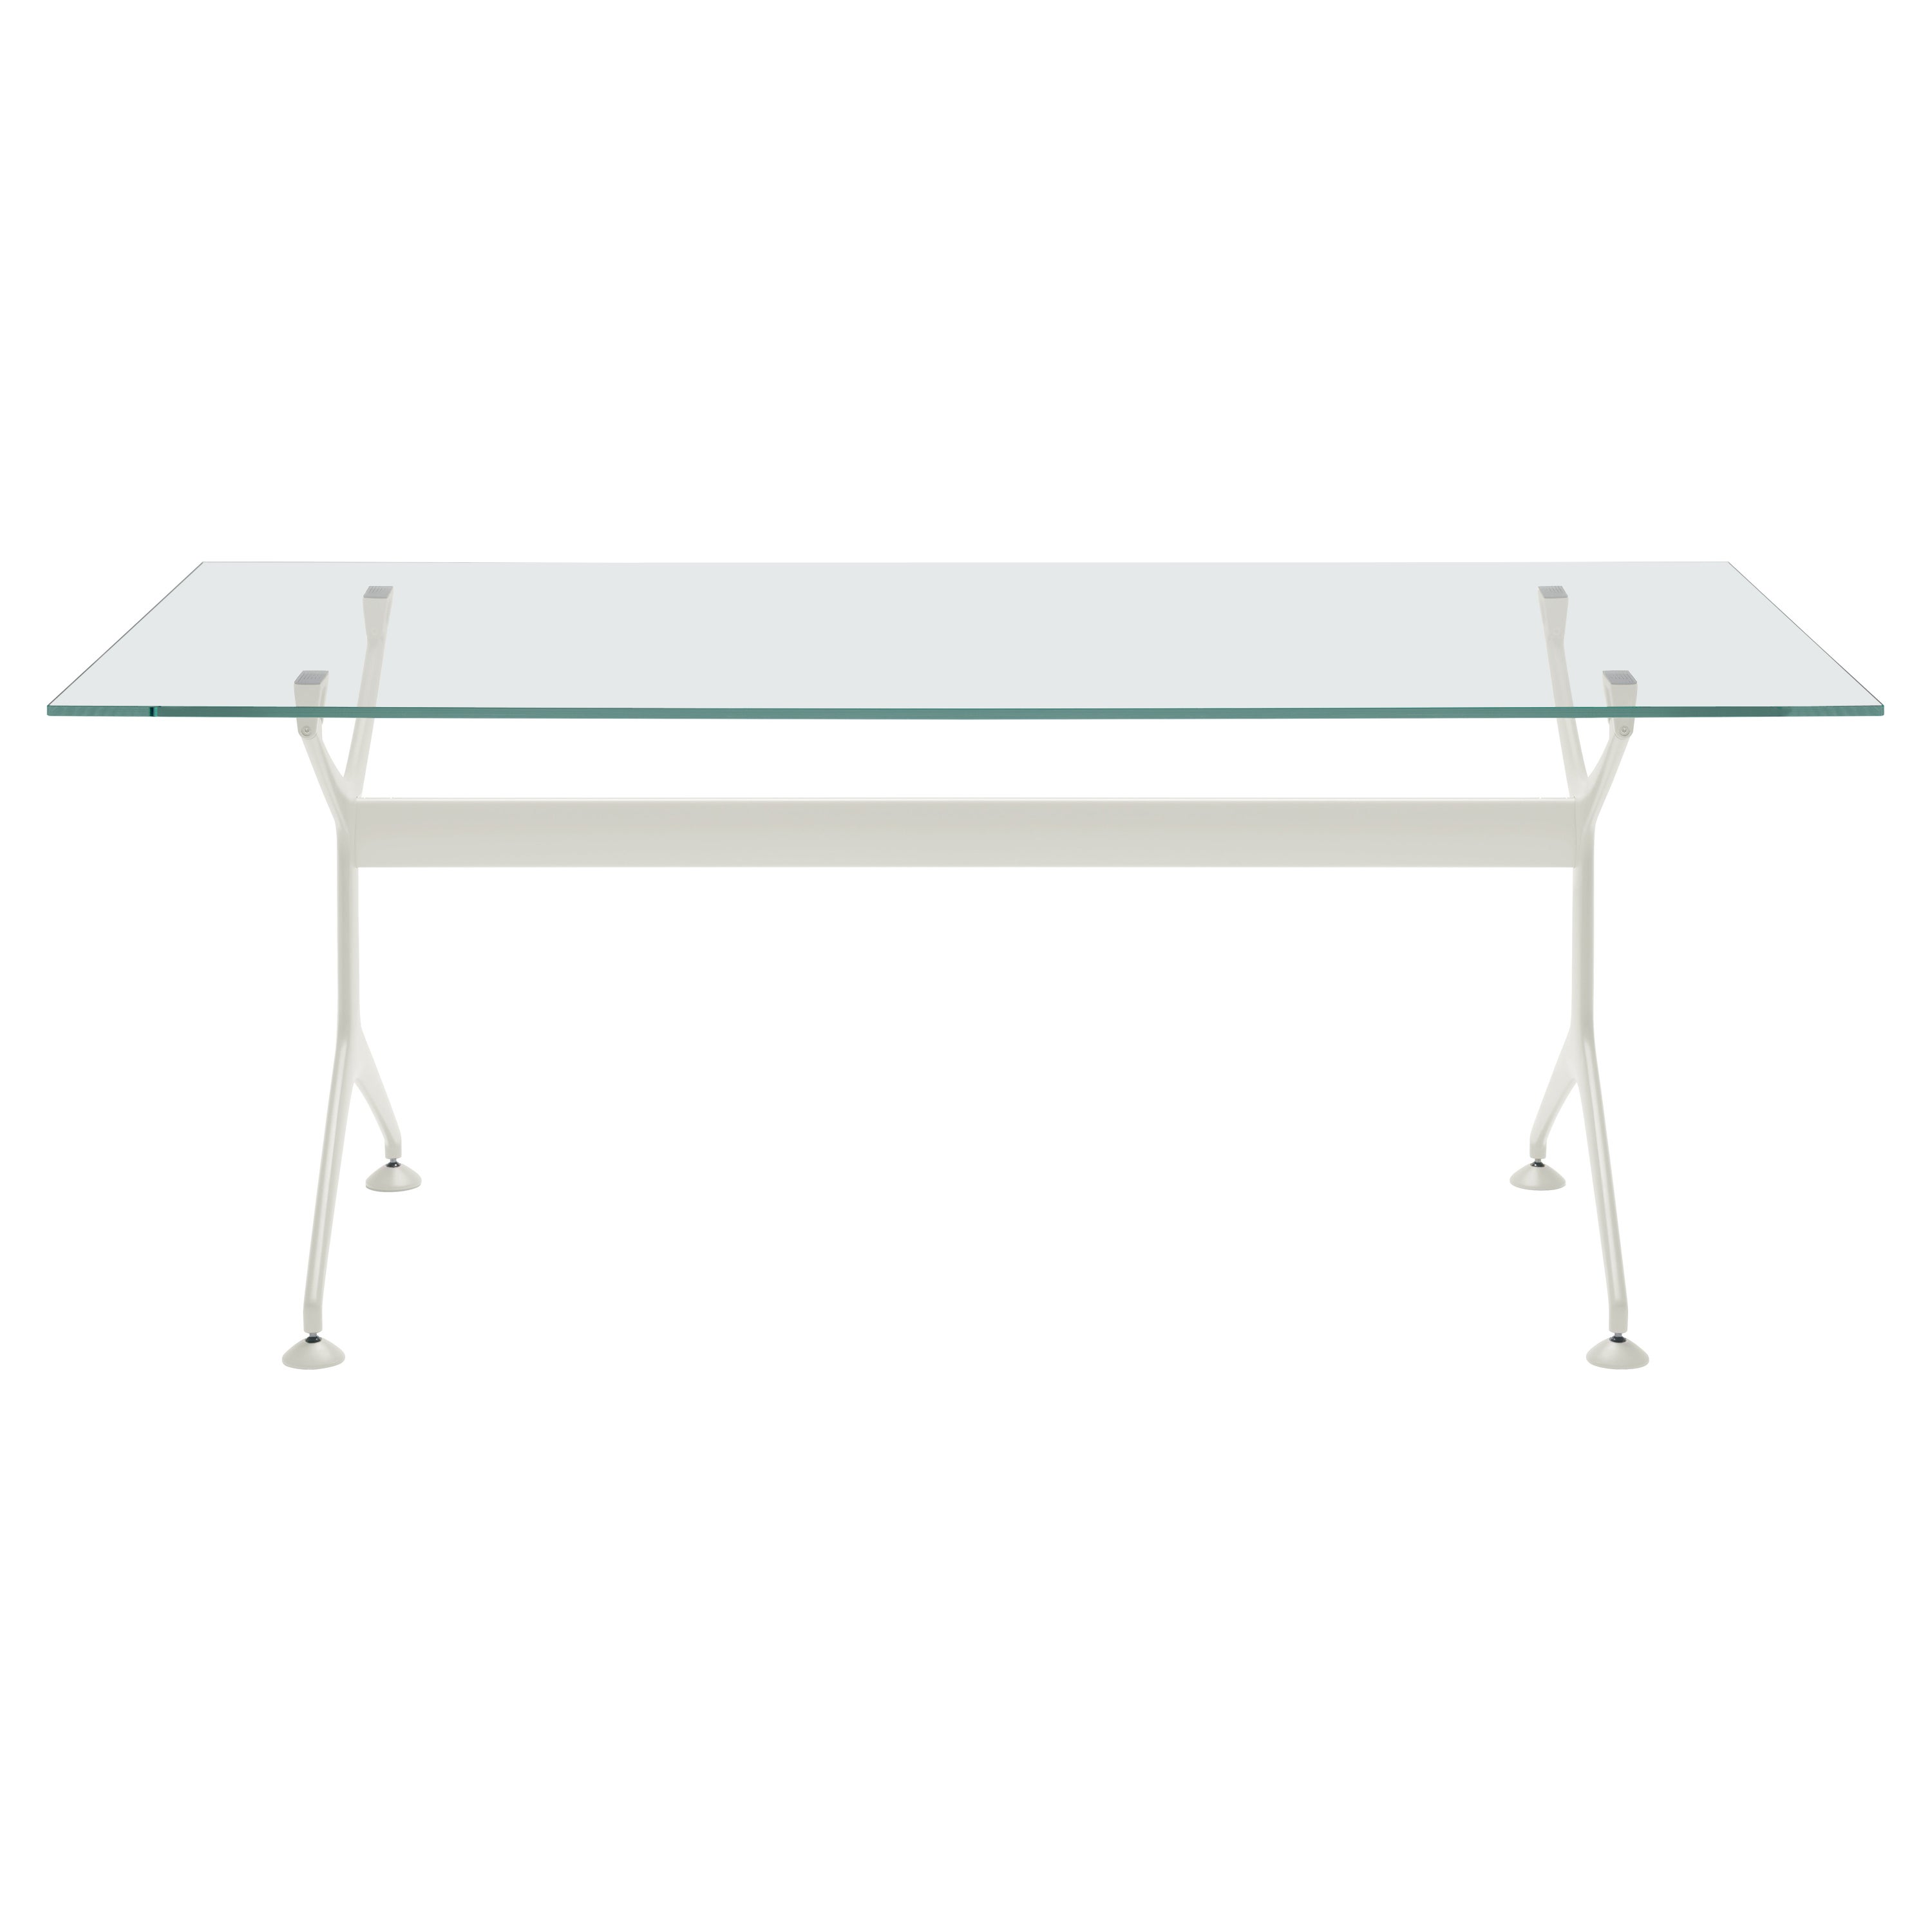 Alias Frametable 240 in Glass Top with White Lacquered Aluminium Frame For Sale